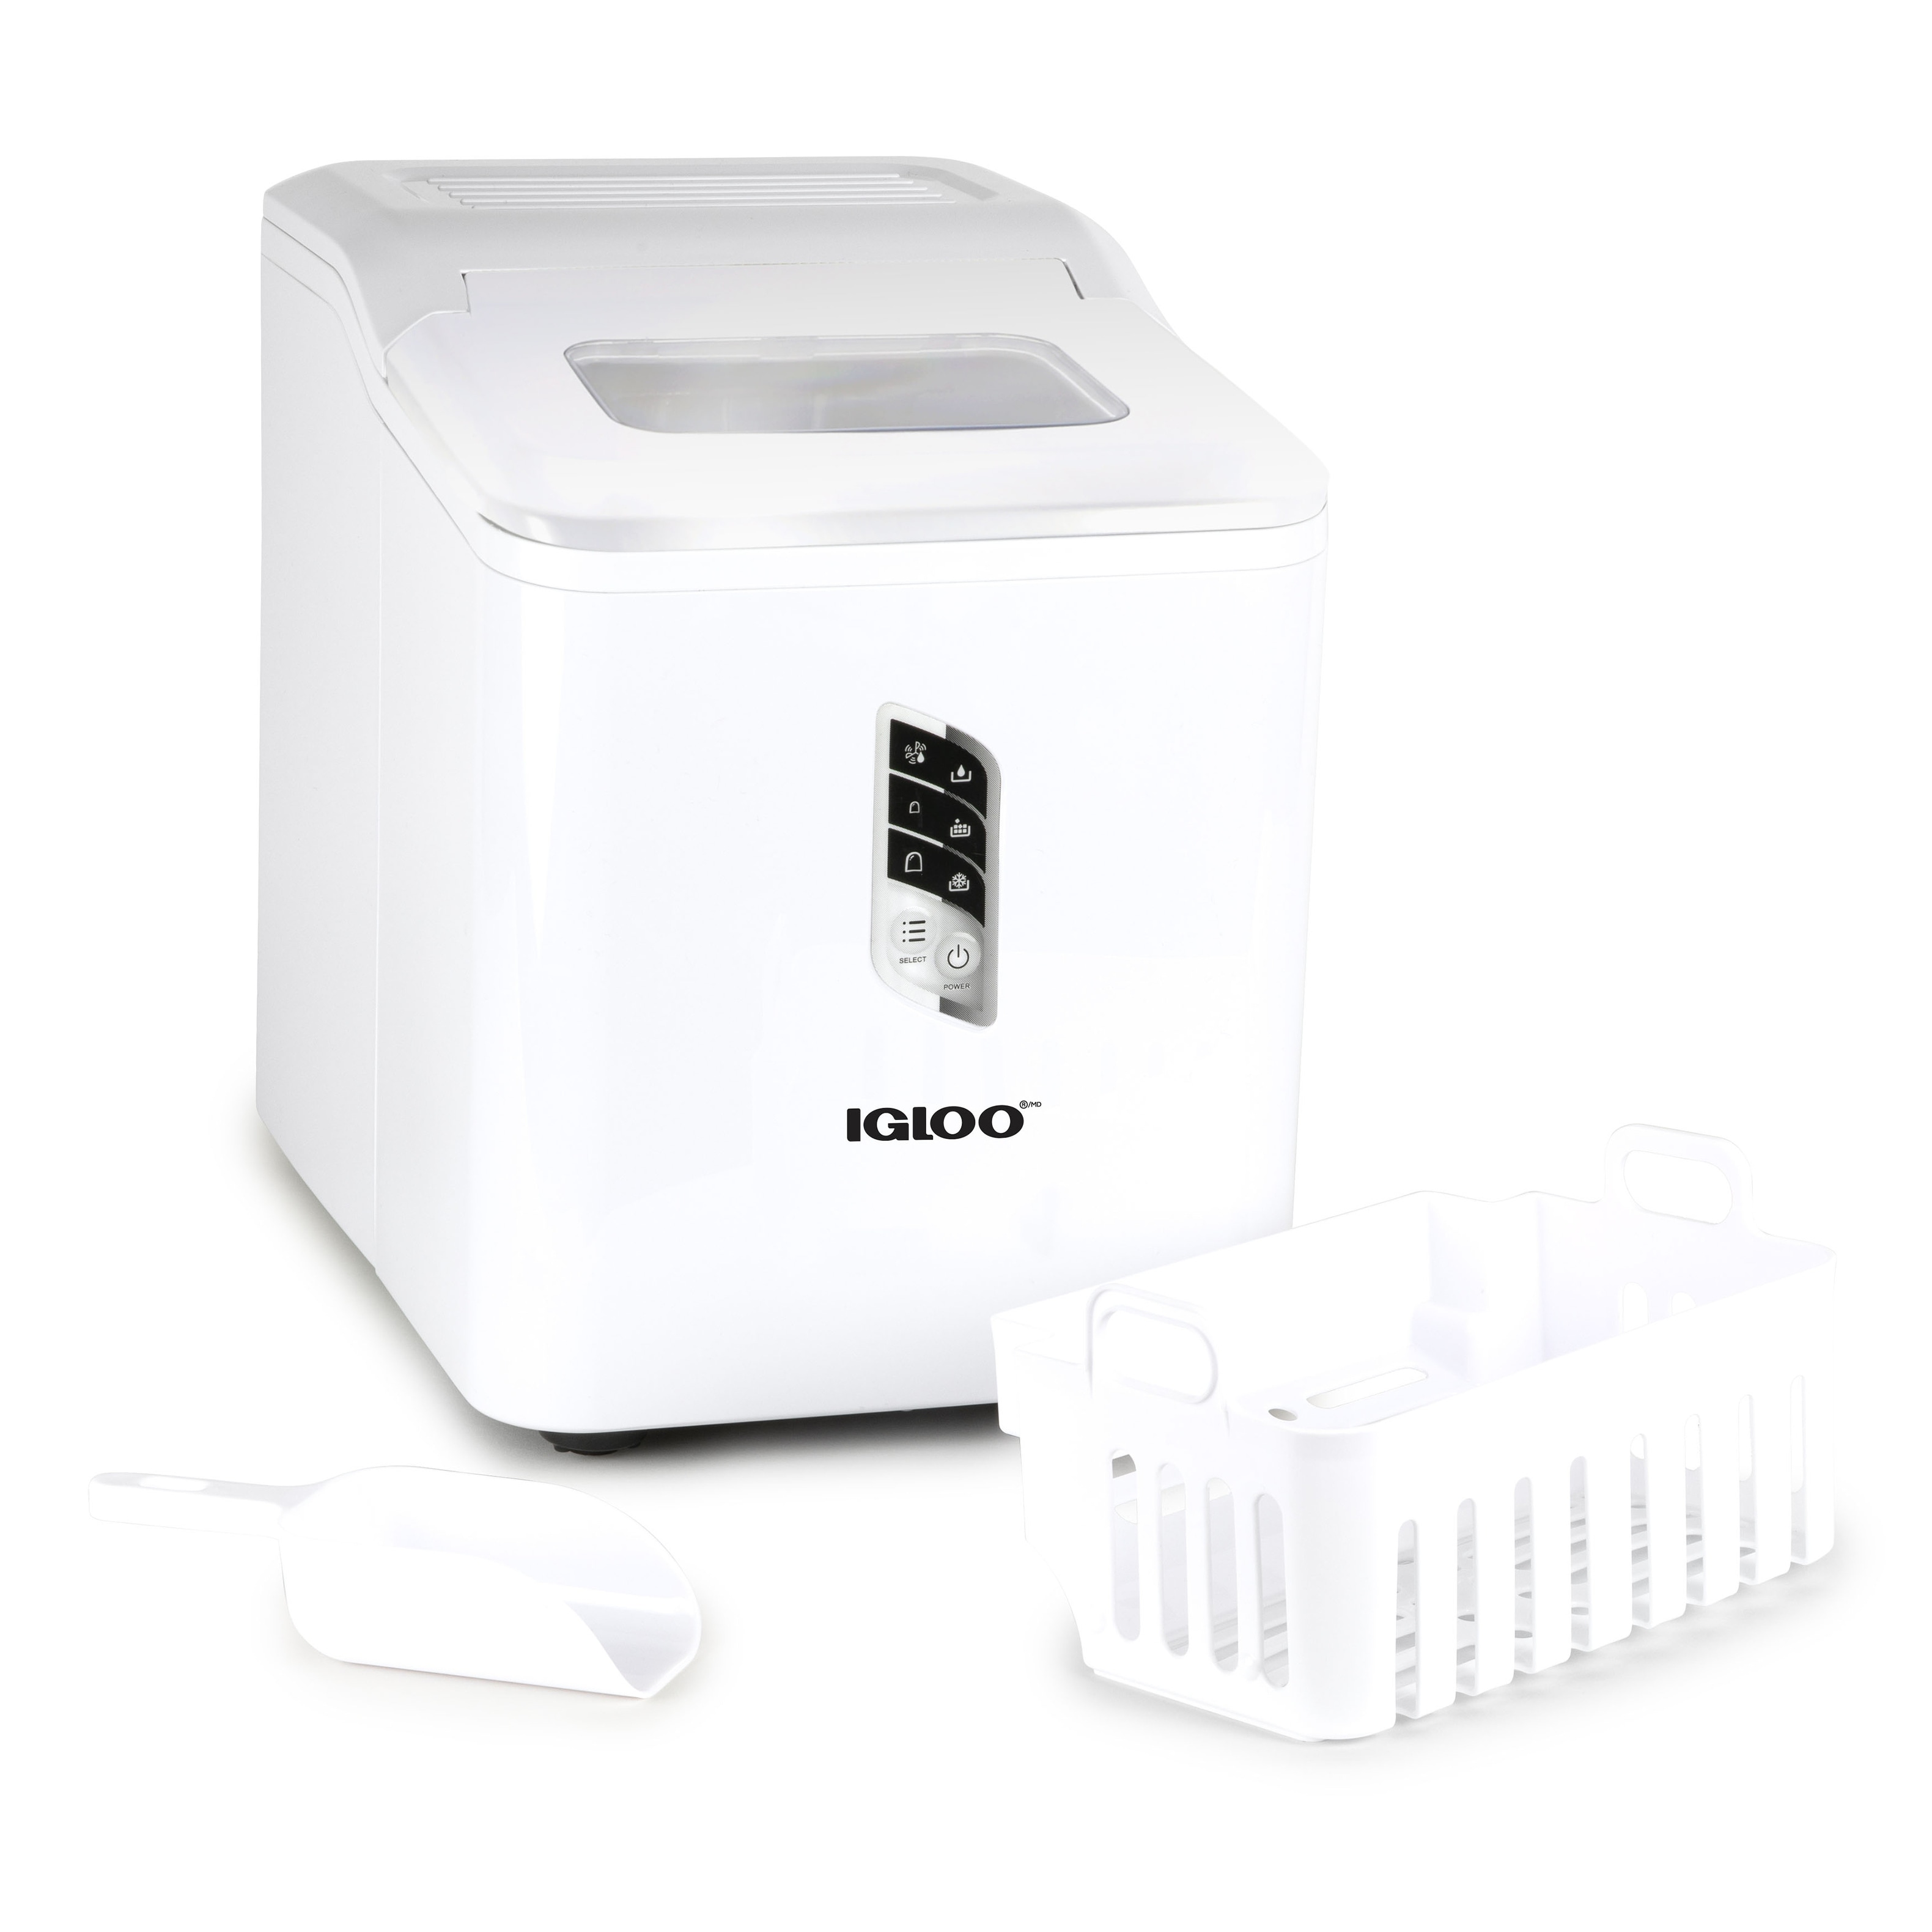 NewAir 44lb. Nugget Countertop Ice Maker with Self-Cleaning